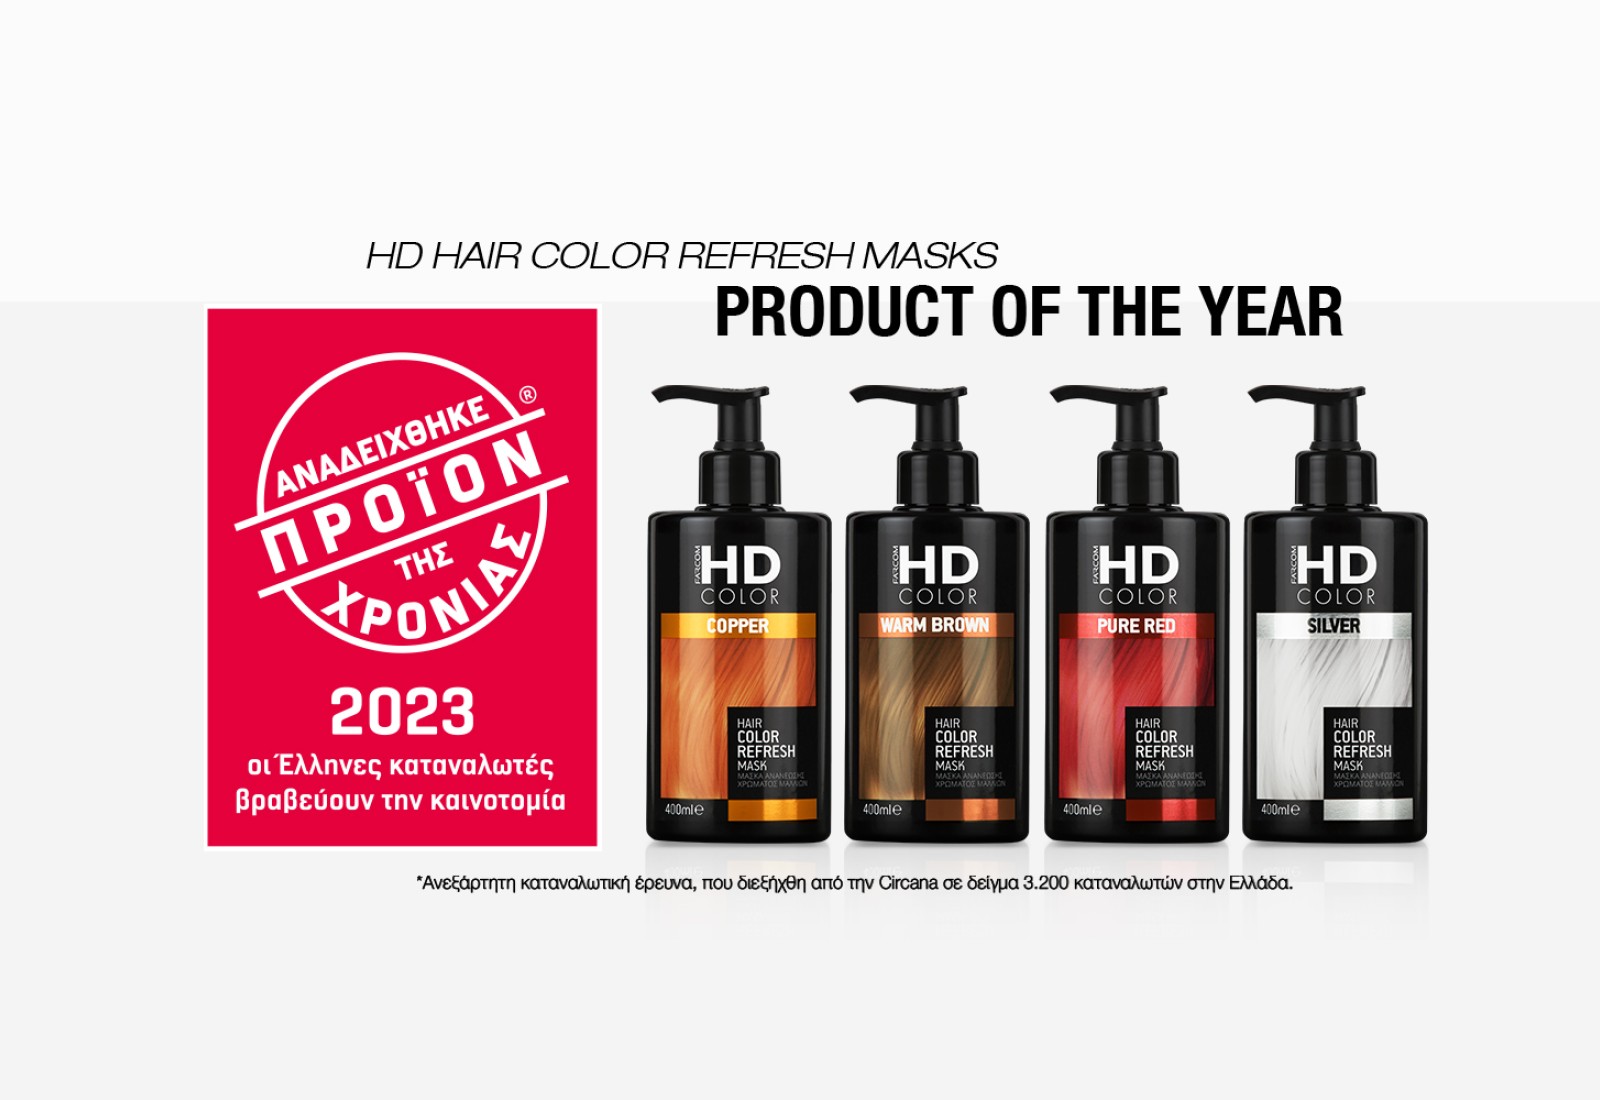 Farcom’s HD Hair Color Refresh Masks named ‘Product of the Year 2023’